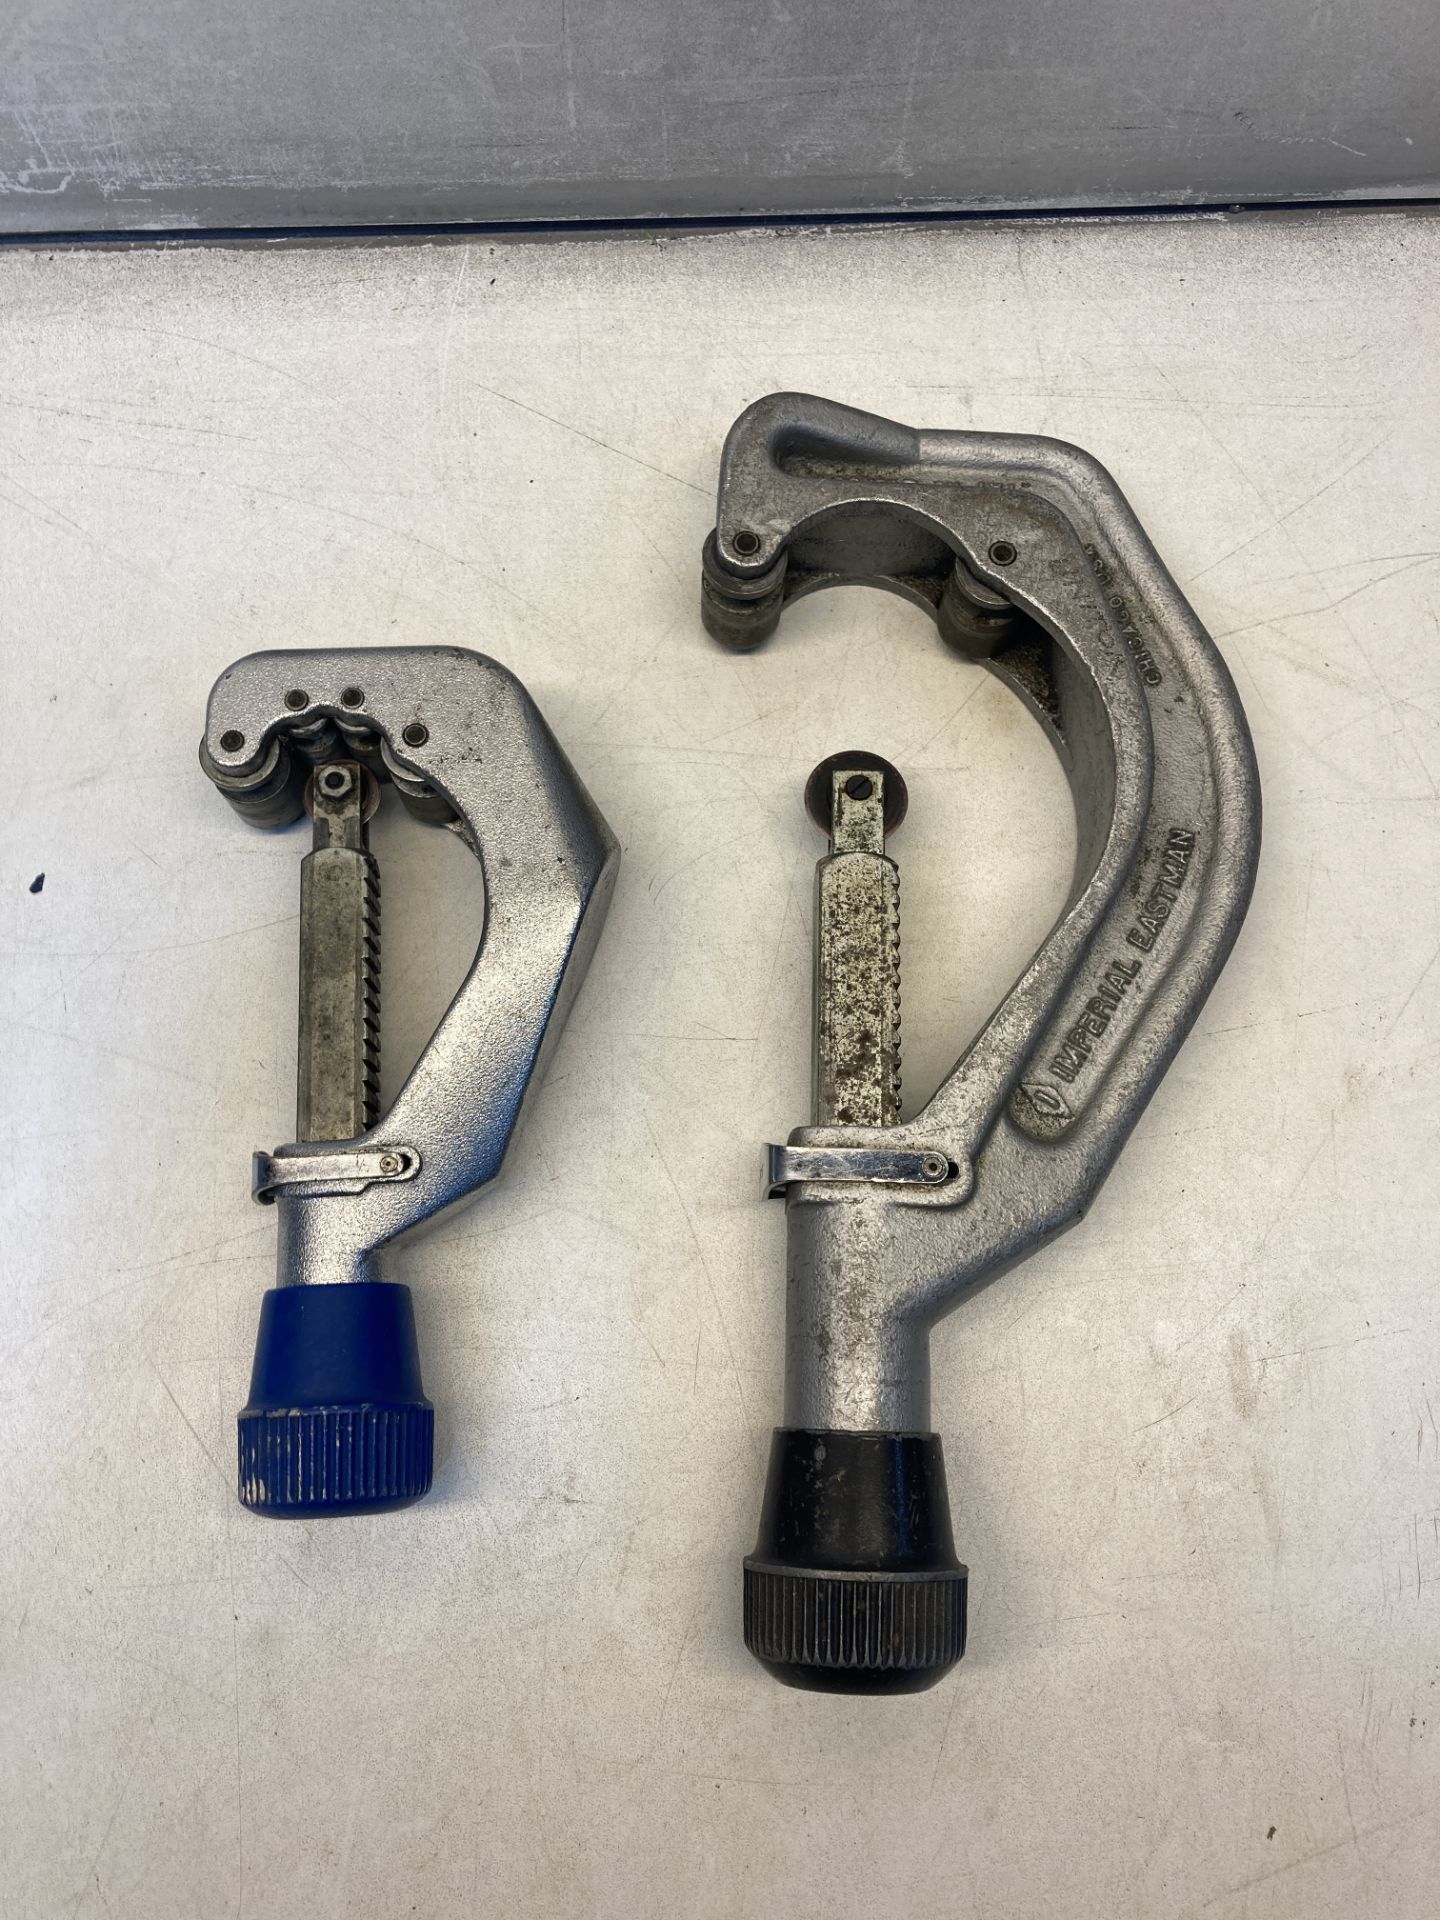 2 x Adjustable Pipe Cutters